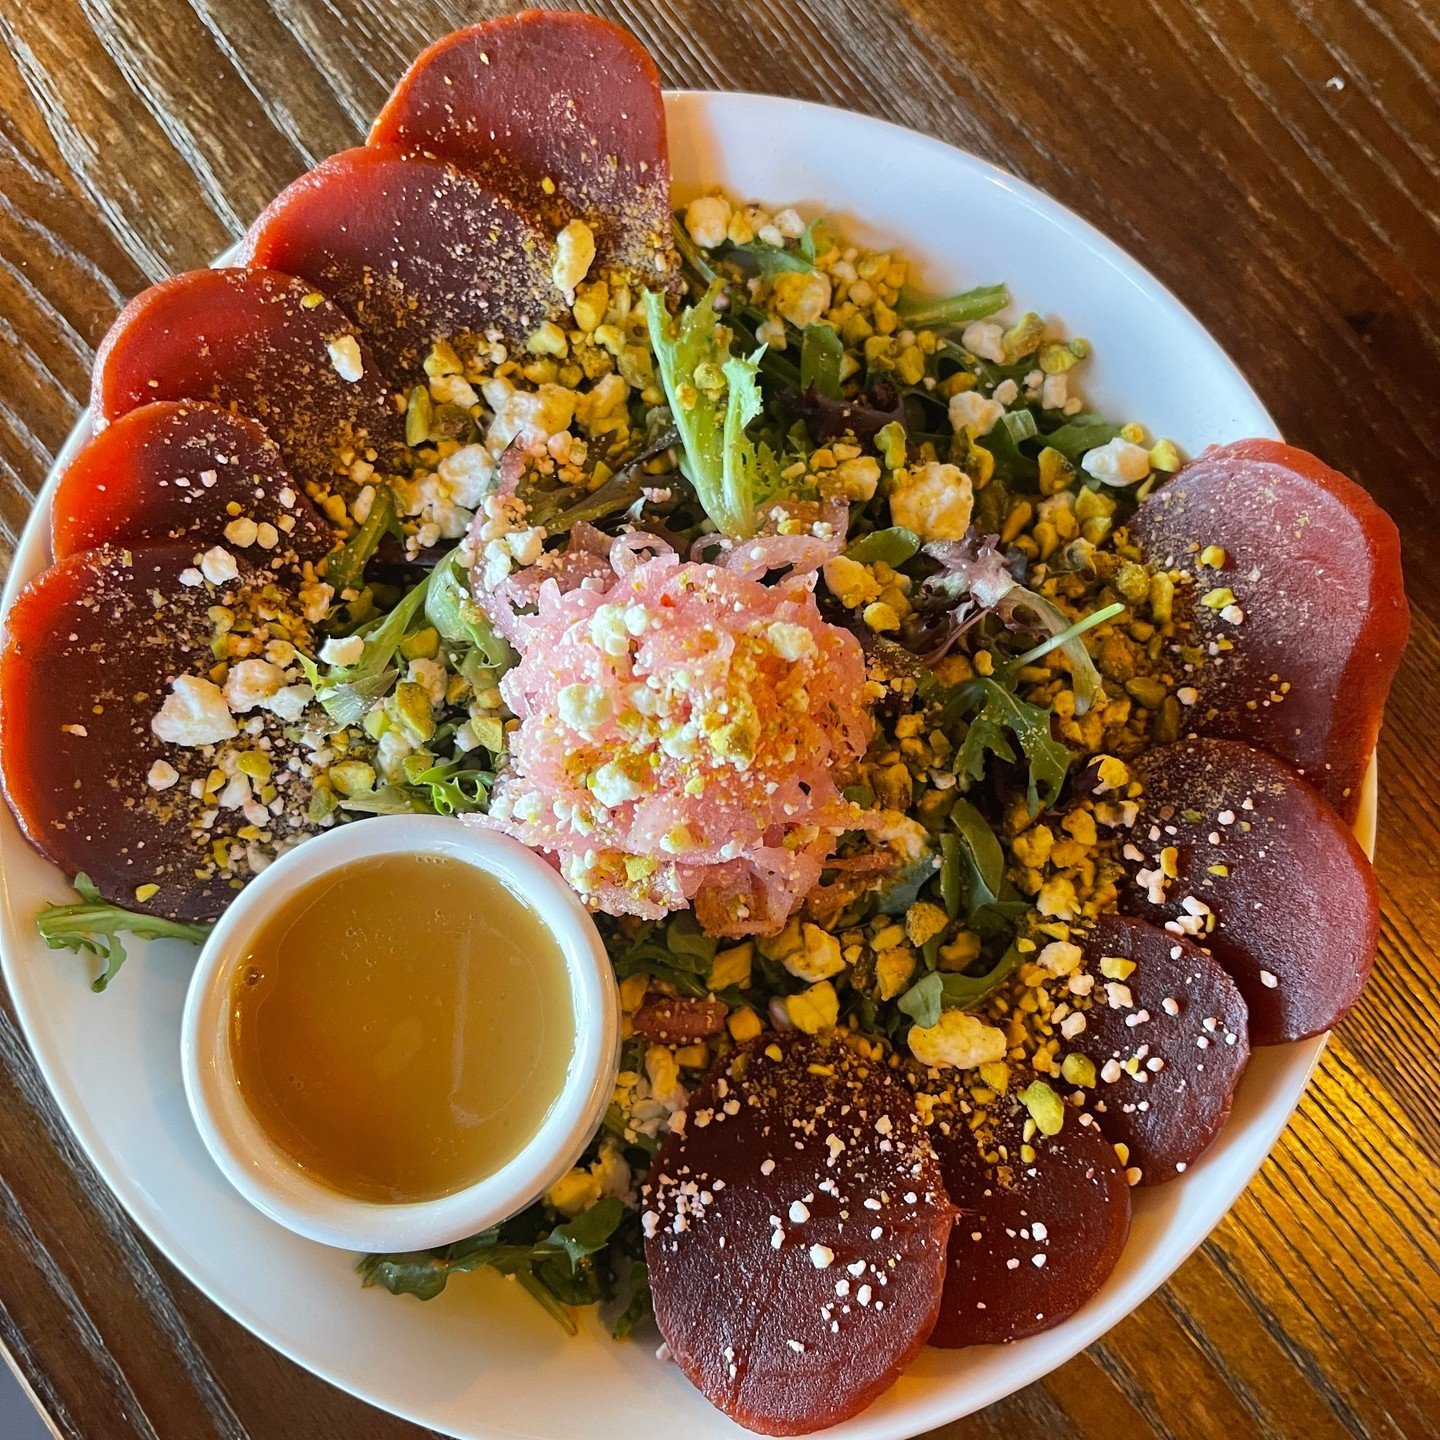 Our beet salad is perfect in the spring. With pickled red onion, beets, arugula, spring mix, goat cheese, and crushed pistachio, it's fresh and super tasty 🥗